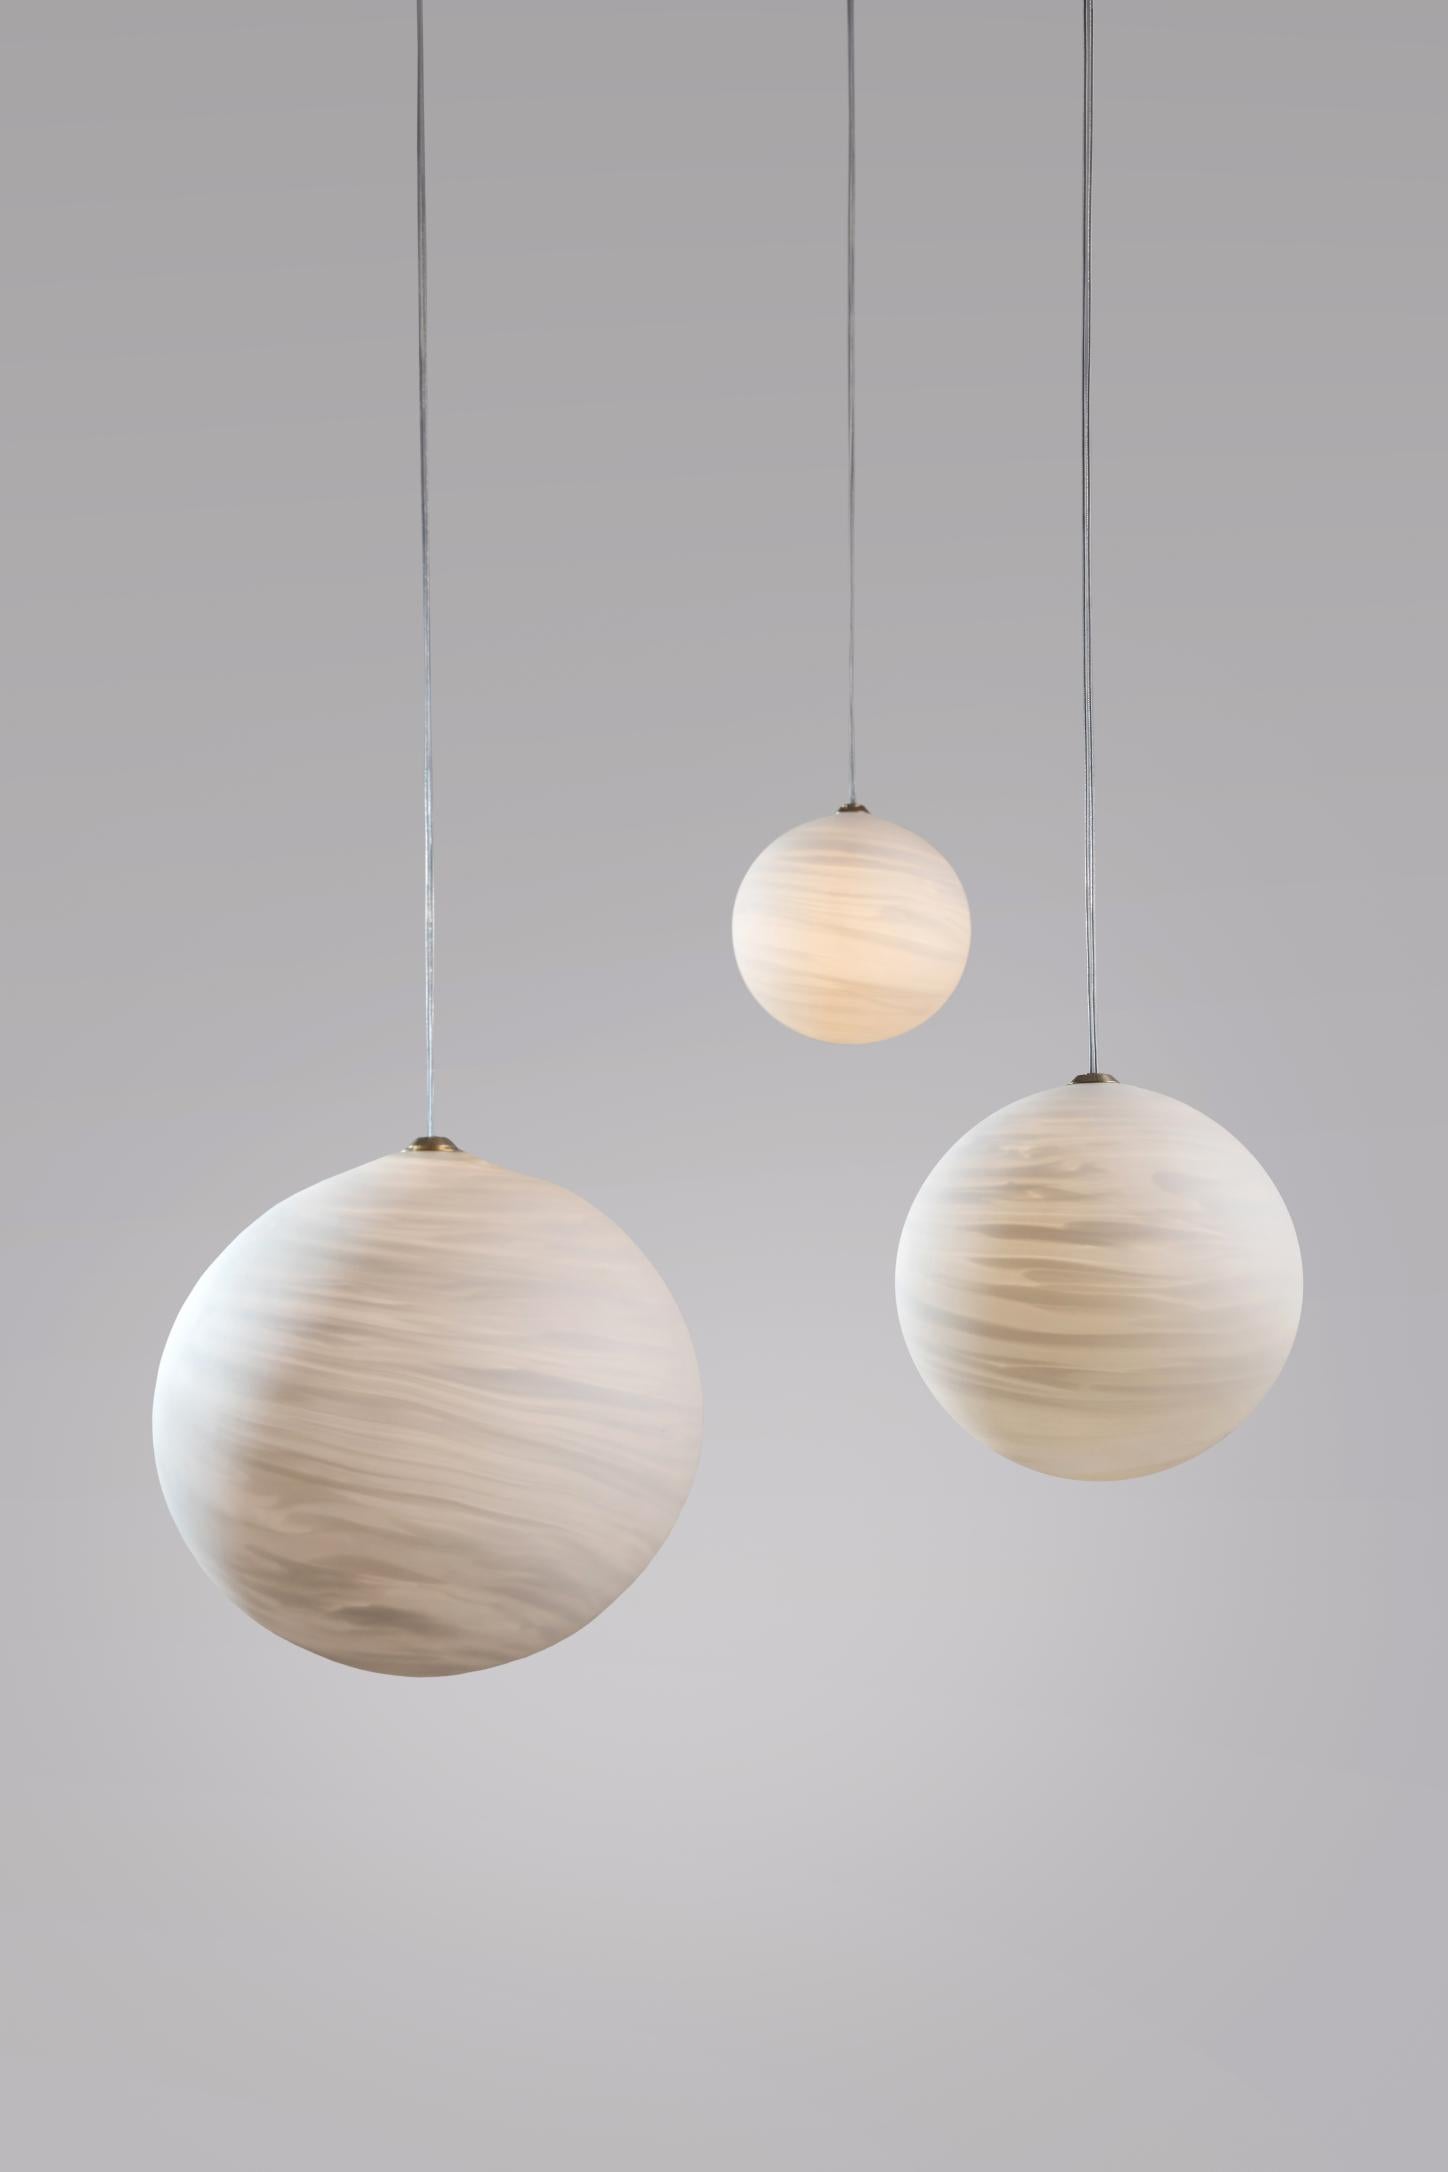 Jupiter hanging lights planets, Ludovic Clément d’Armont.
Every creation of Ludovic Clément d’Armont can be made to order in any requested dimensions. 
Blown glass
Dimensions of the planets can vary in the following dimensions: 10 cm, 14 cm, 18